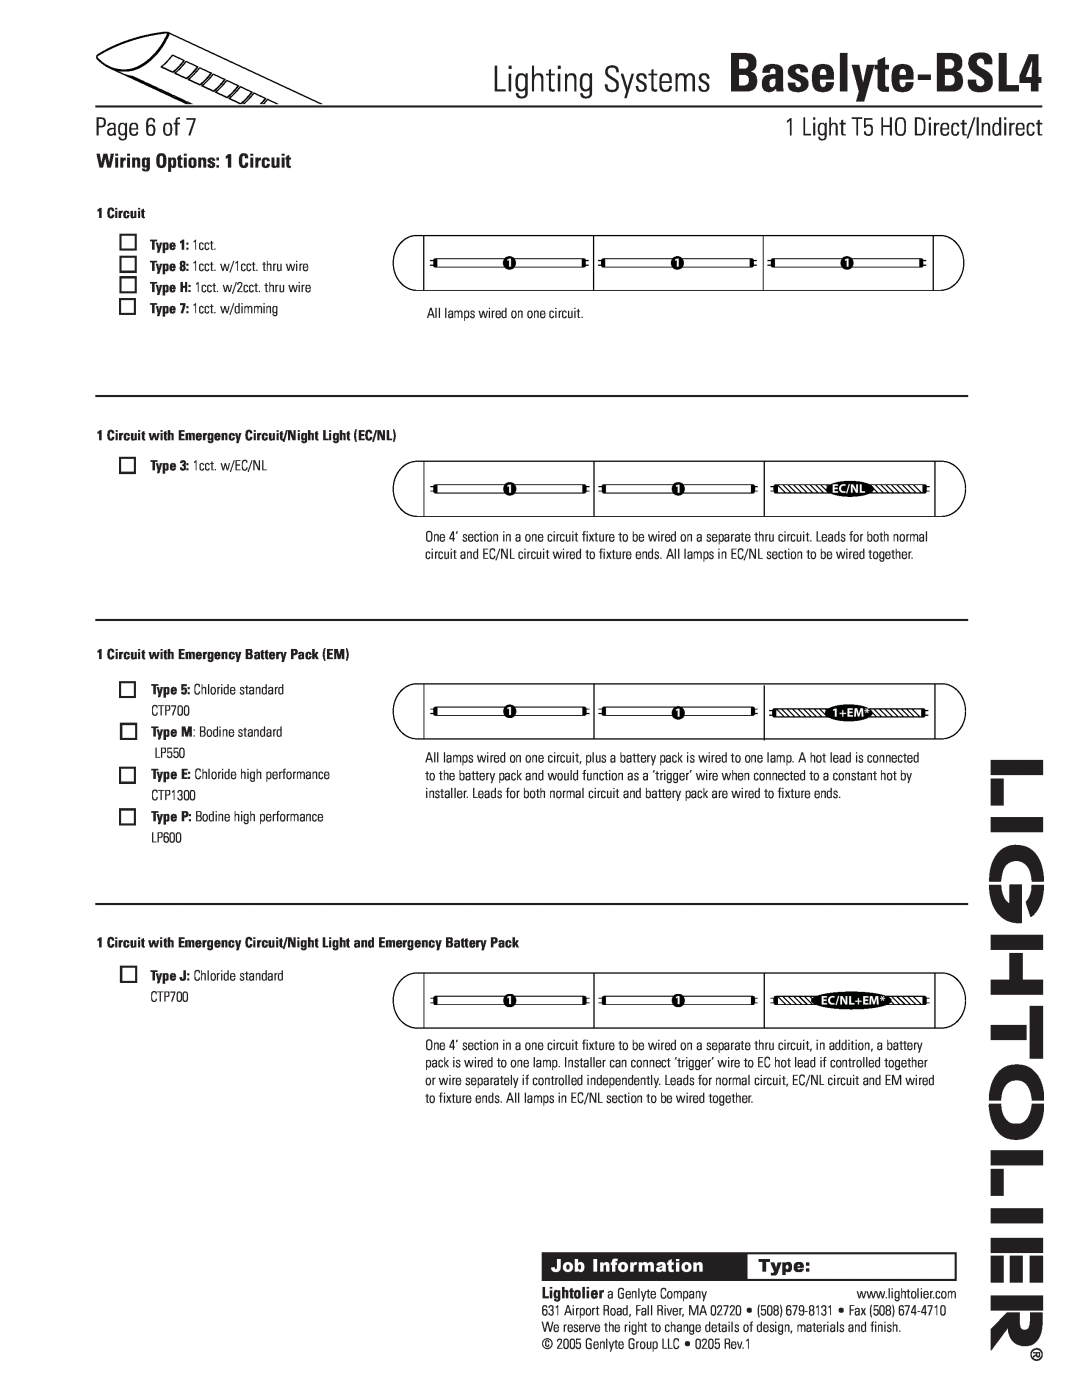 Lightolier Baselyte-BSL4 Wiring Options 1 Circuit, Circuit Type 1 1cct, Circuit with Emergency Battery Pack EM, Page of 